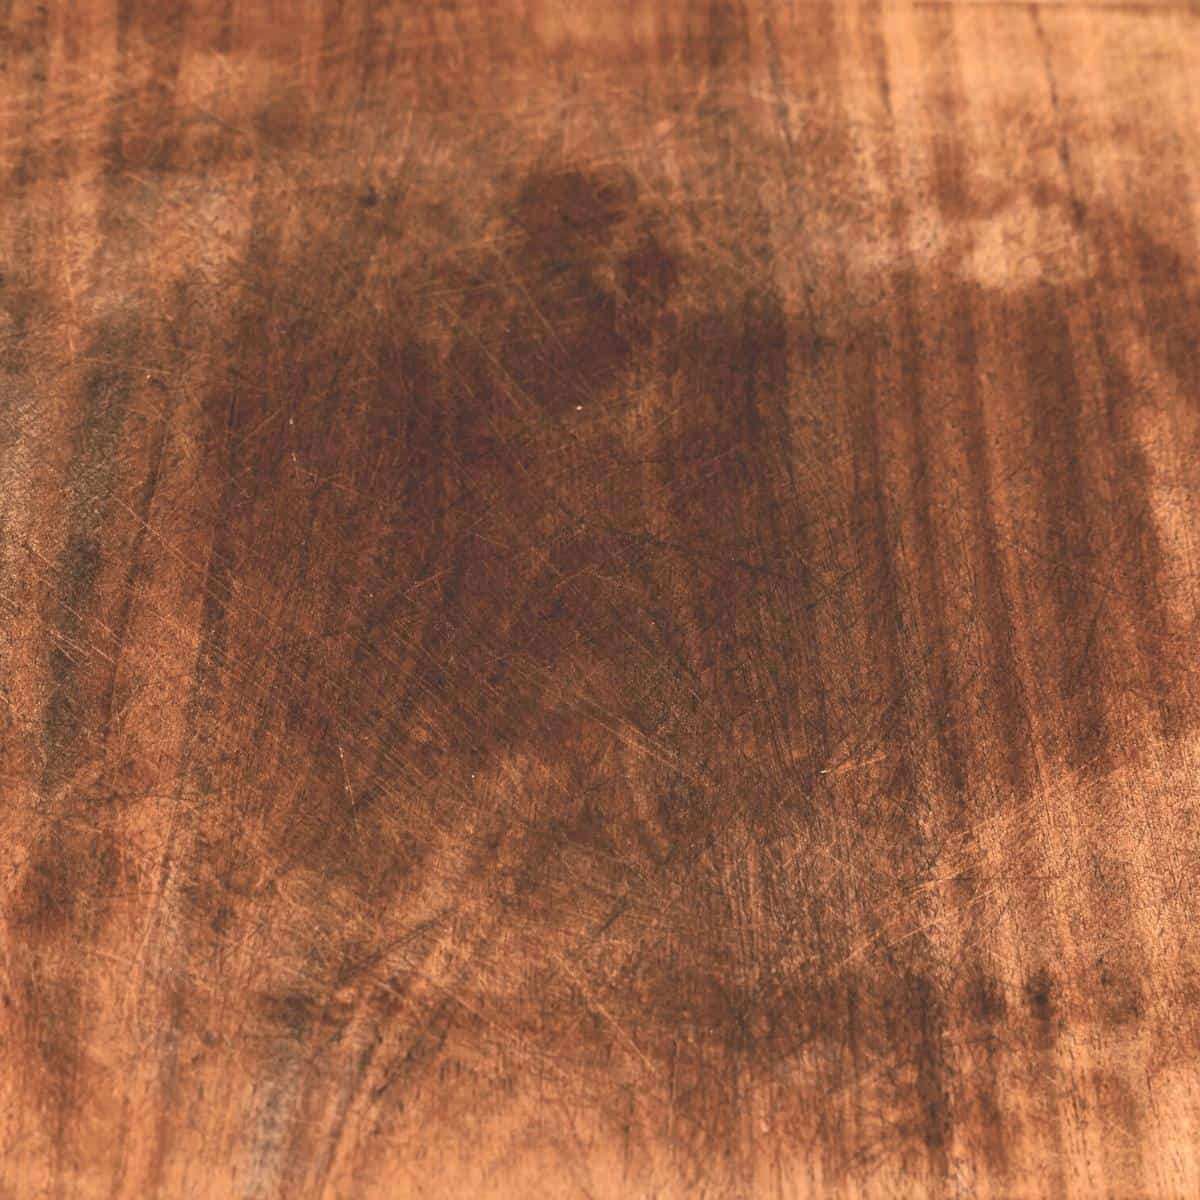 discolored wood